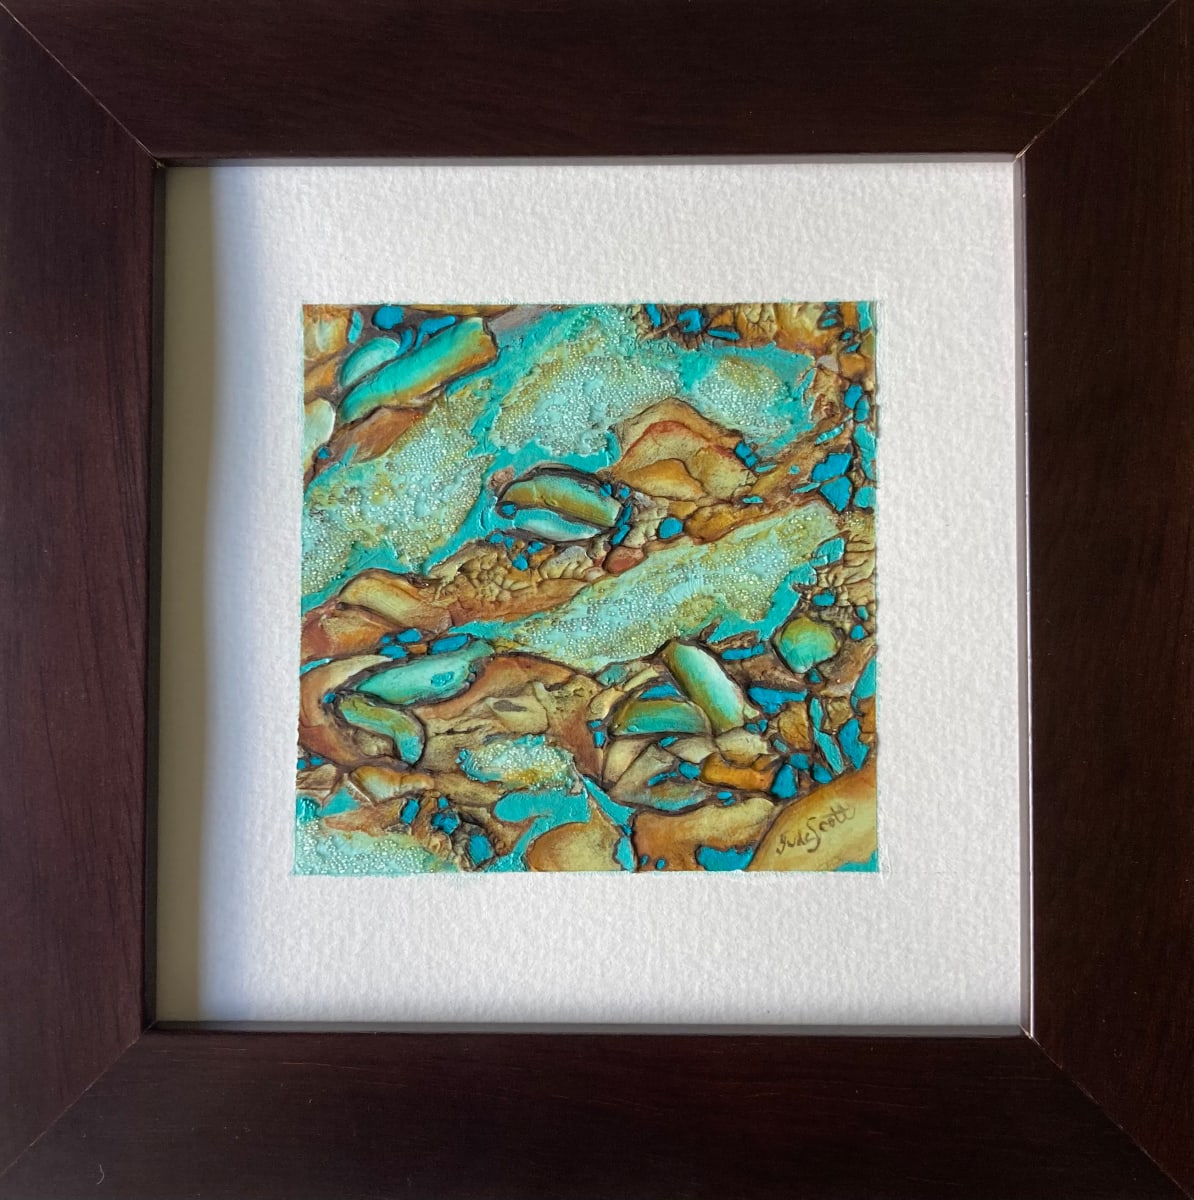 Rock Pools Mini by Jude Scott  Image:  My abstract, mixed media artworks are inspired by the sparkling turquoise waters and sedimentary rock structures along the coastline where rock pools form.  Multiple layers of  texture  and acrylic paints are used to create the effect I'm looking for. 